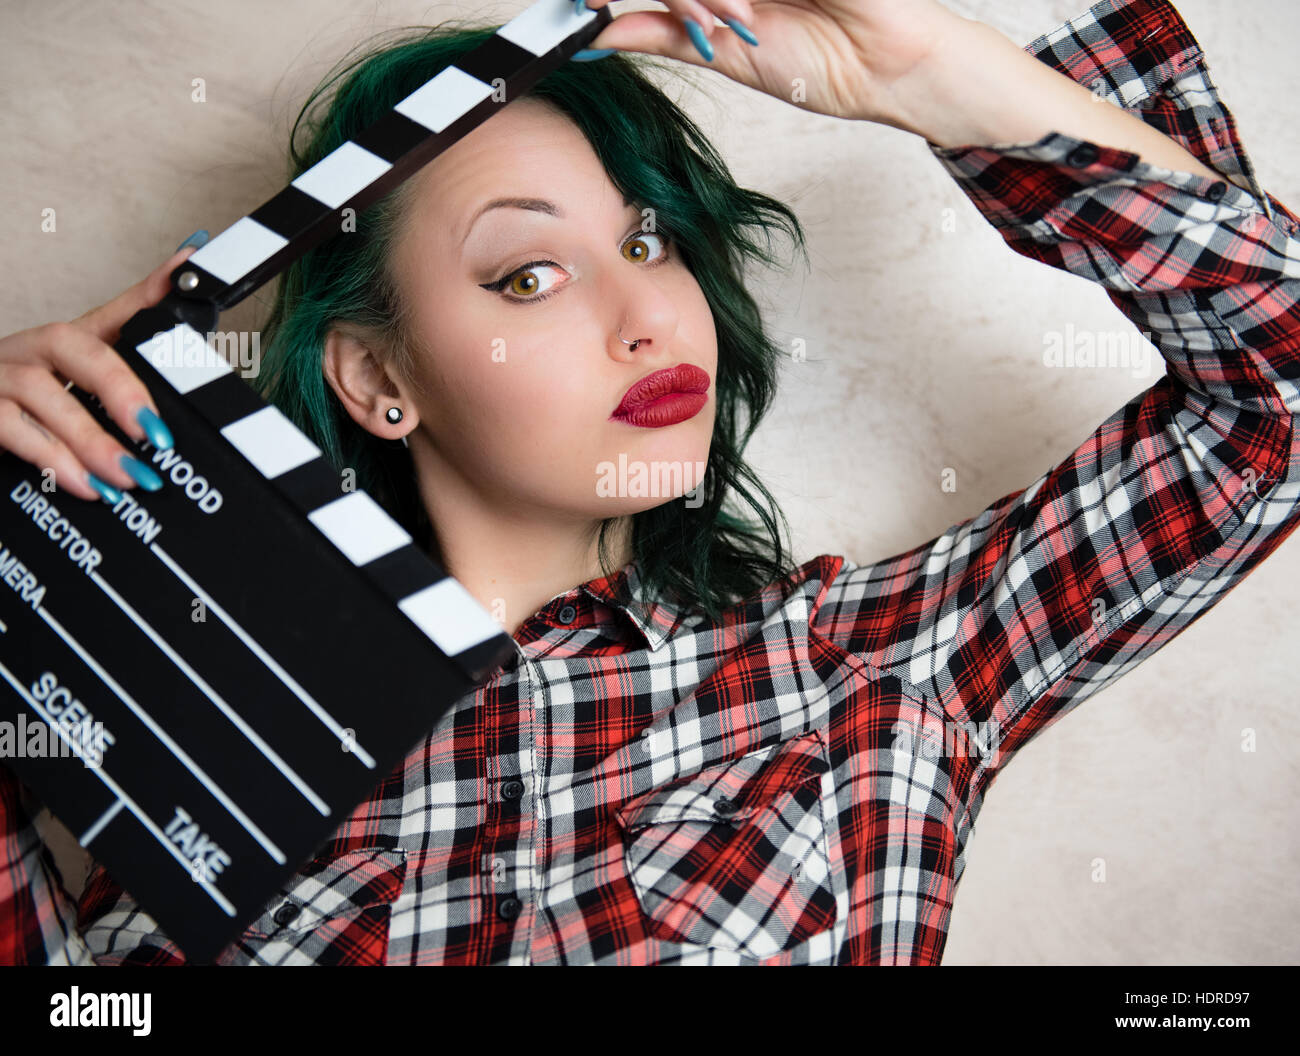 Young alternative girl grimace face and posing with movie clapper board for actress audition Stock Photo